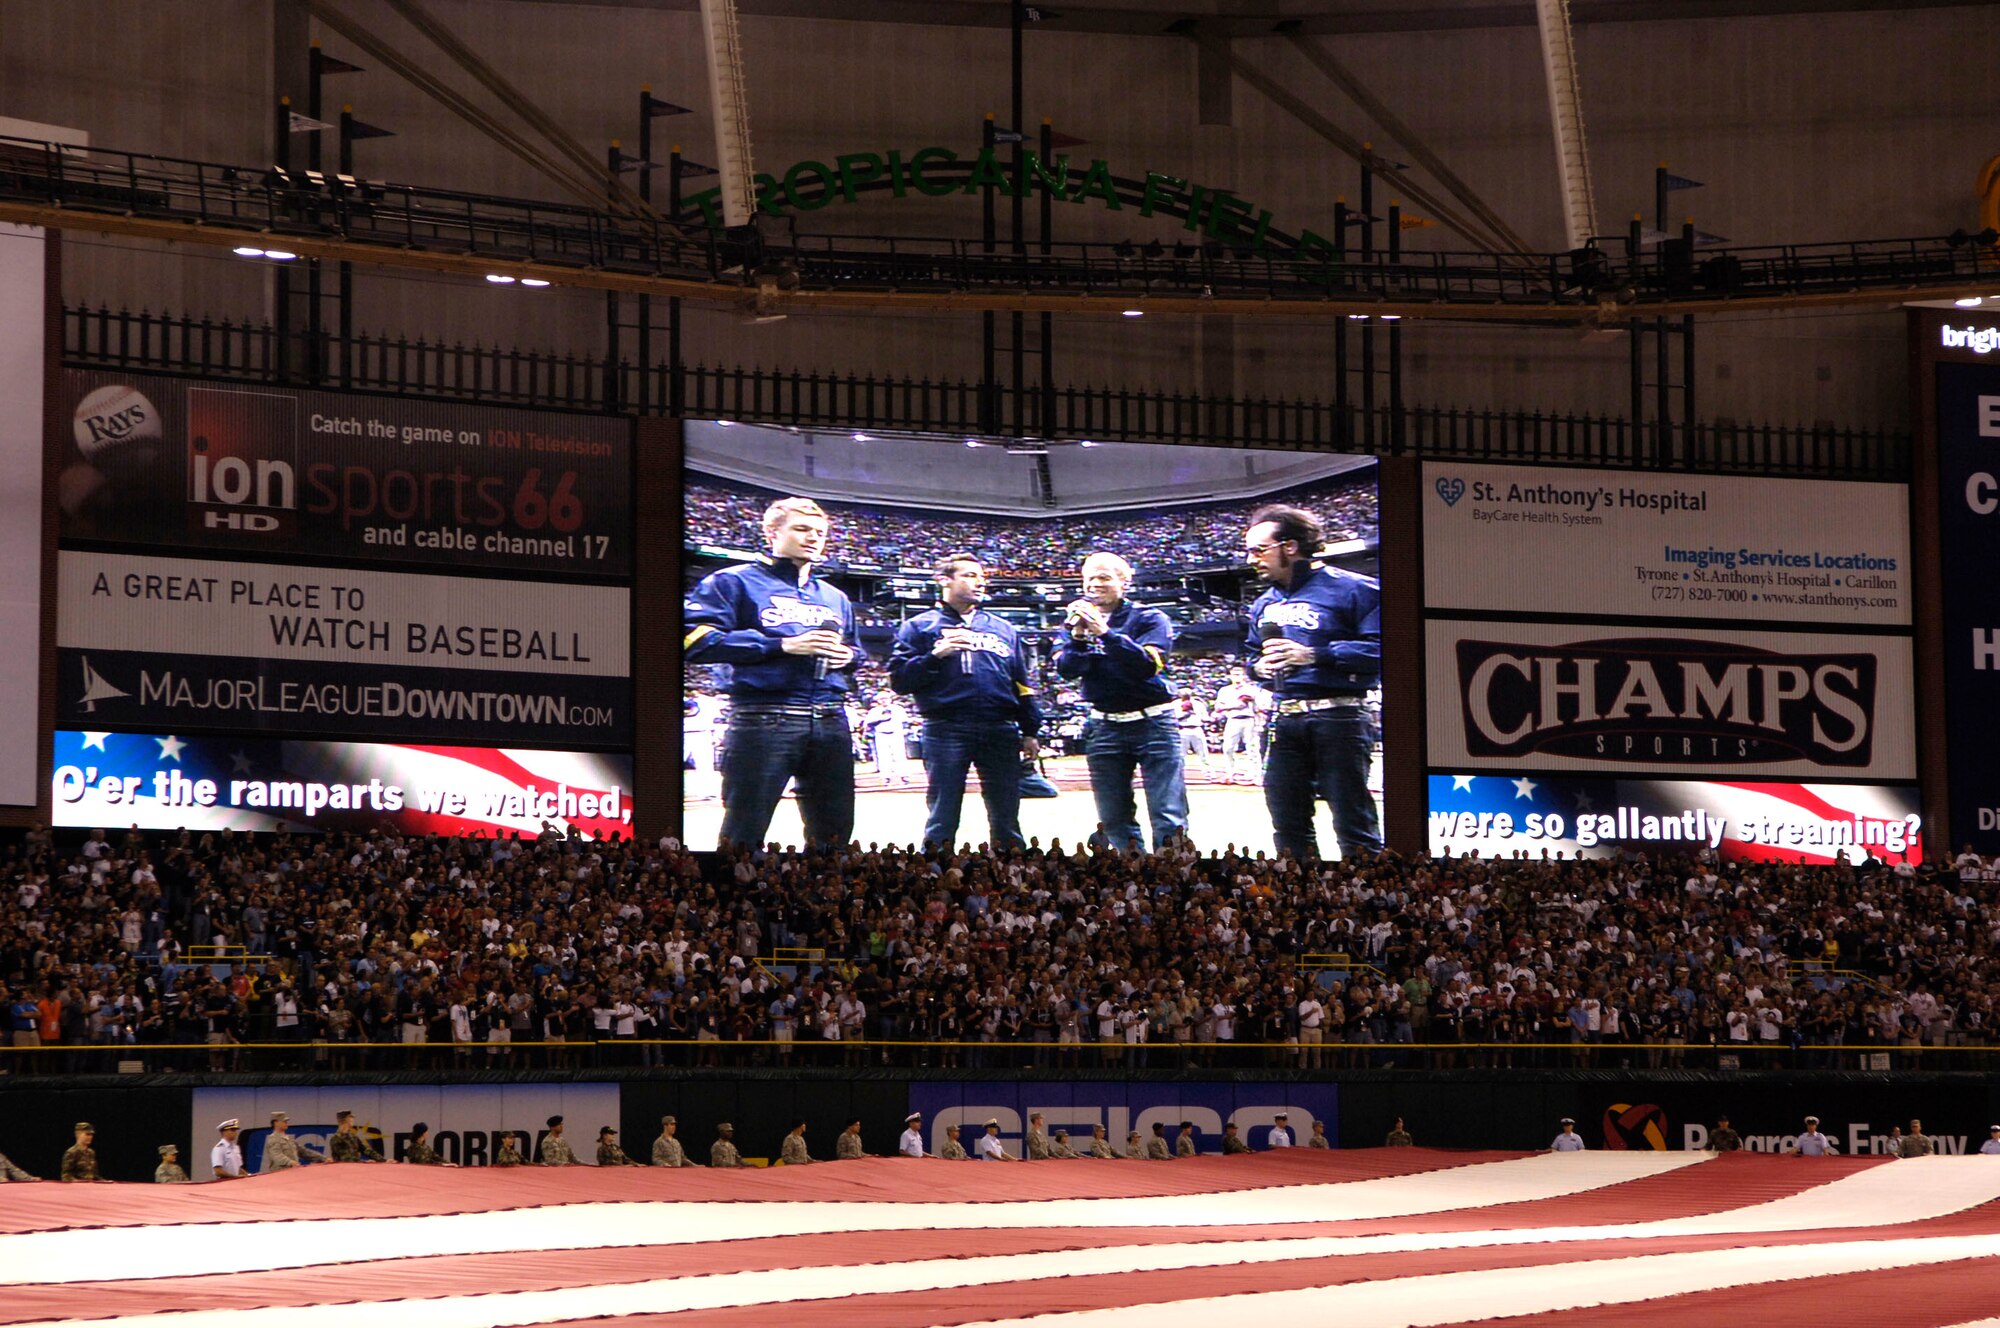 Members of the 6th Air Mobility Wing along with members of the U.S. Coast Guard assigned to sector St. Petersburg, Fla., hold the American Flag during the National Anthem sung by the Backstreet Boys during the first game of the World Series Oct. 22, where the Philadelphia Phillies took on the Tampa Bay Rays. (U.S. Air Force Photo by Senior Airman Stephenie Wade)